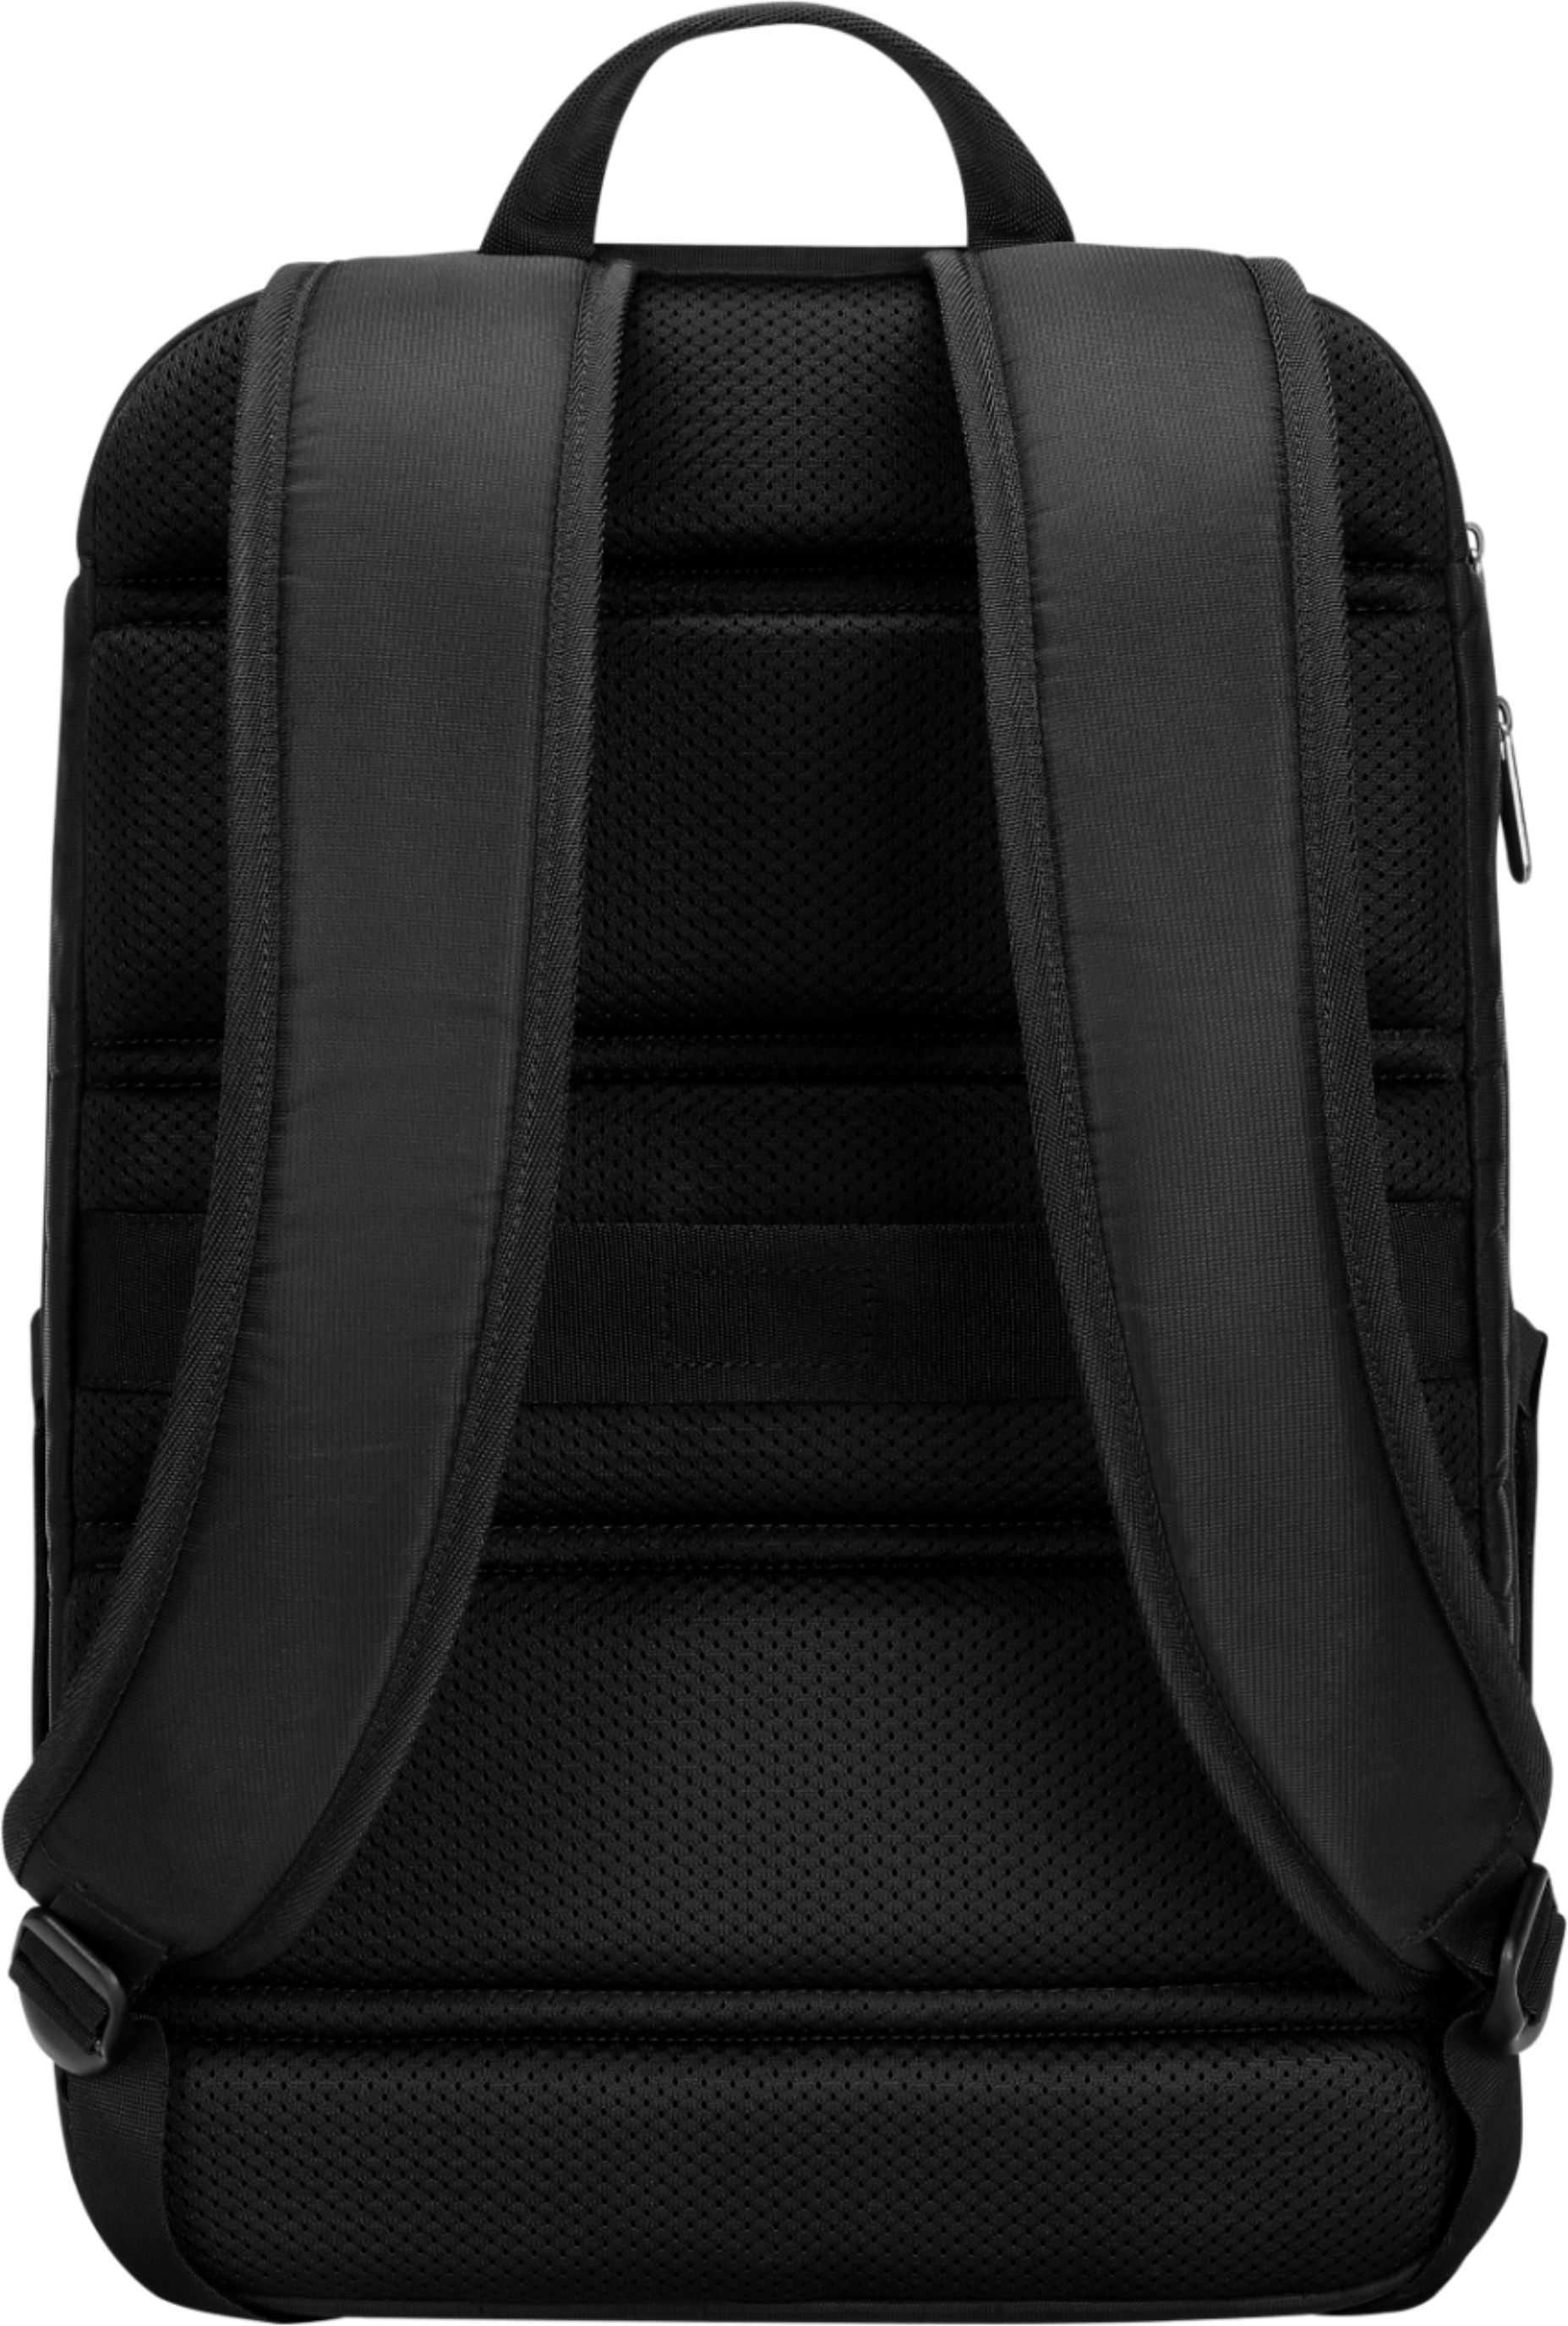 Angle View: GoPro - Daytripper Backpack for 15" Laptop - Volcanic Gray / Atomic Black